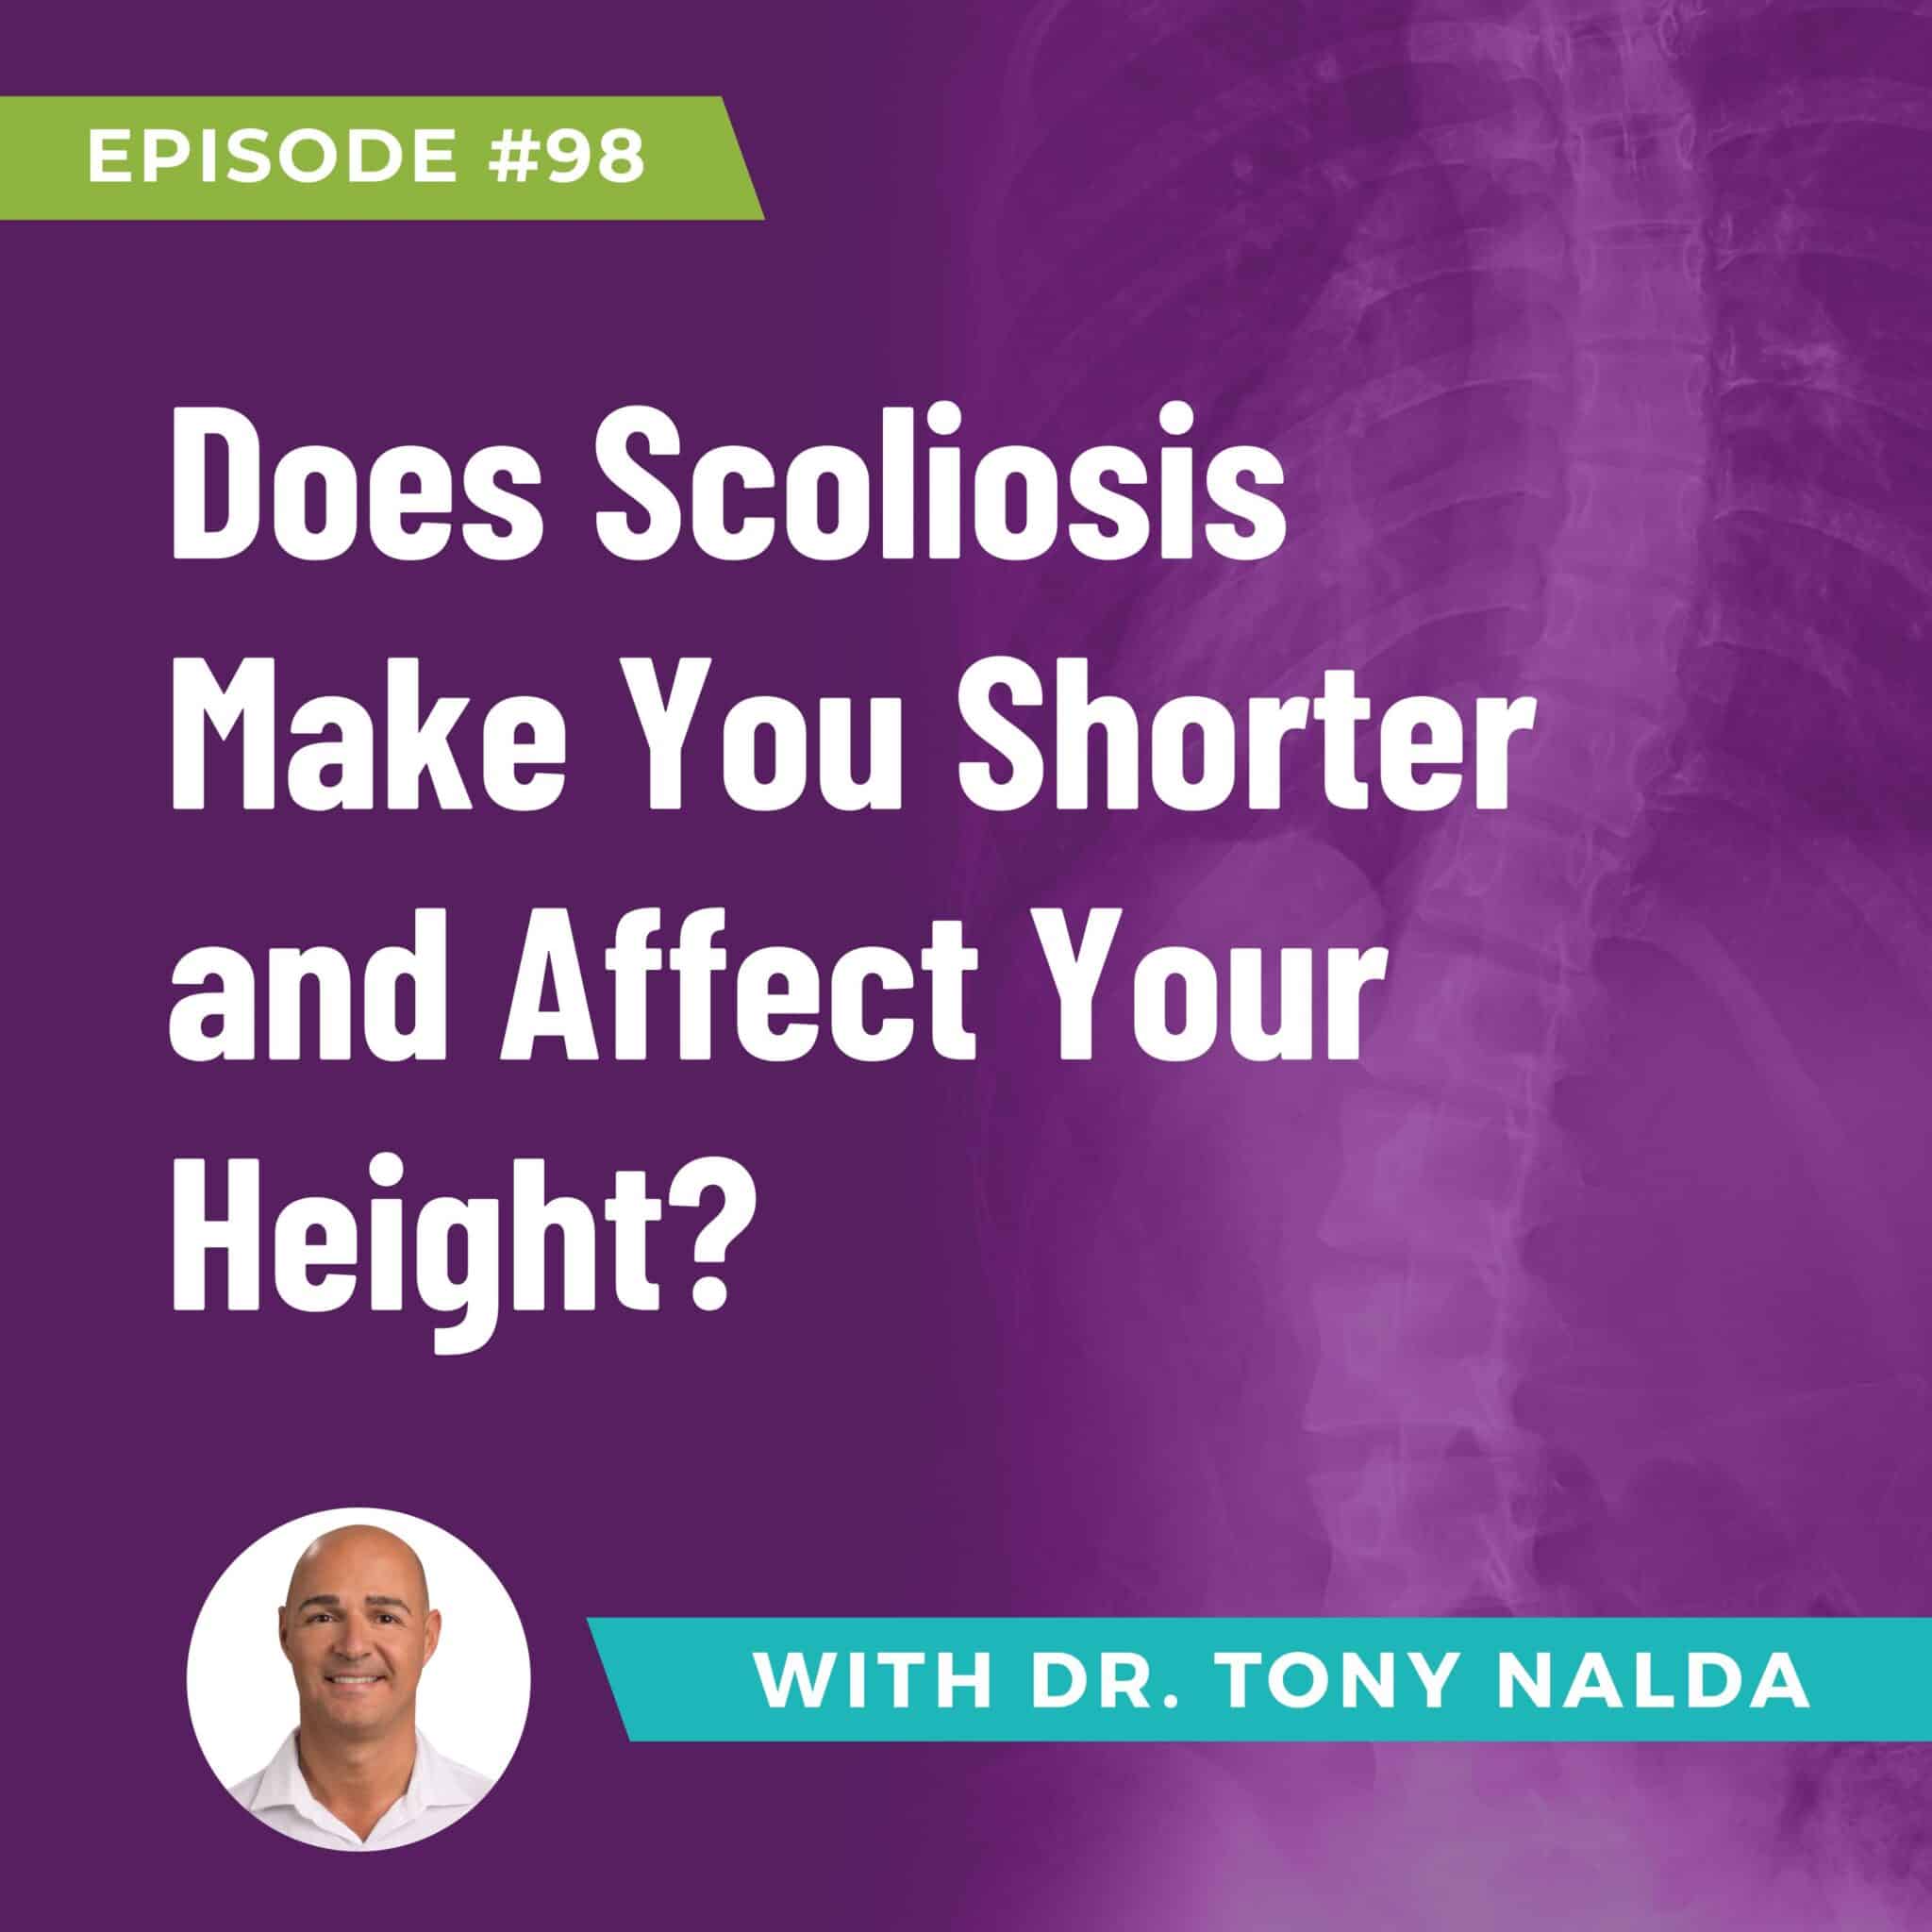 Does Scoliosis Make You Shorter and Affect Your Height